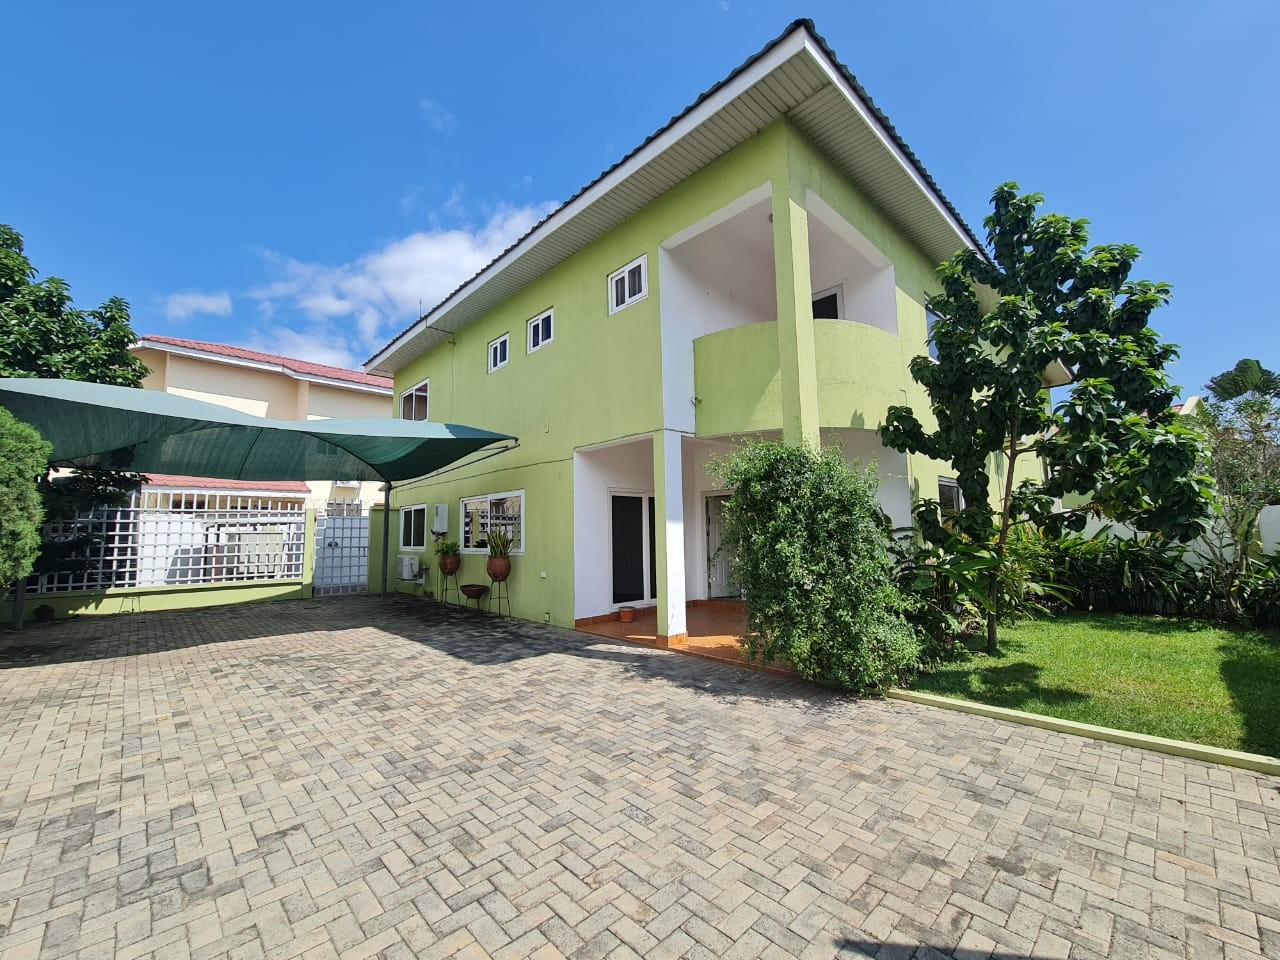 3 BEDROOM HOUSE FOR RENT AT CANTONMENTS